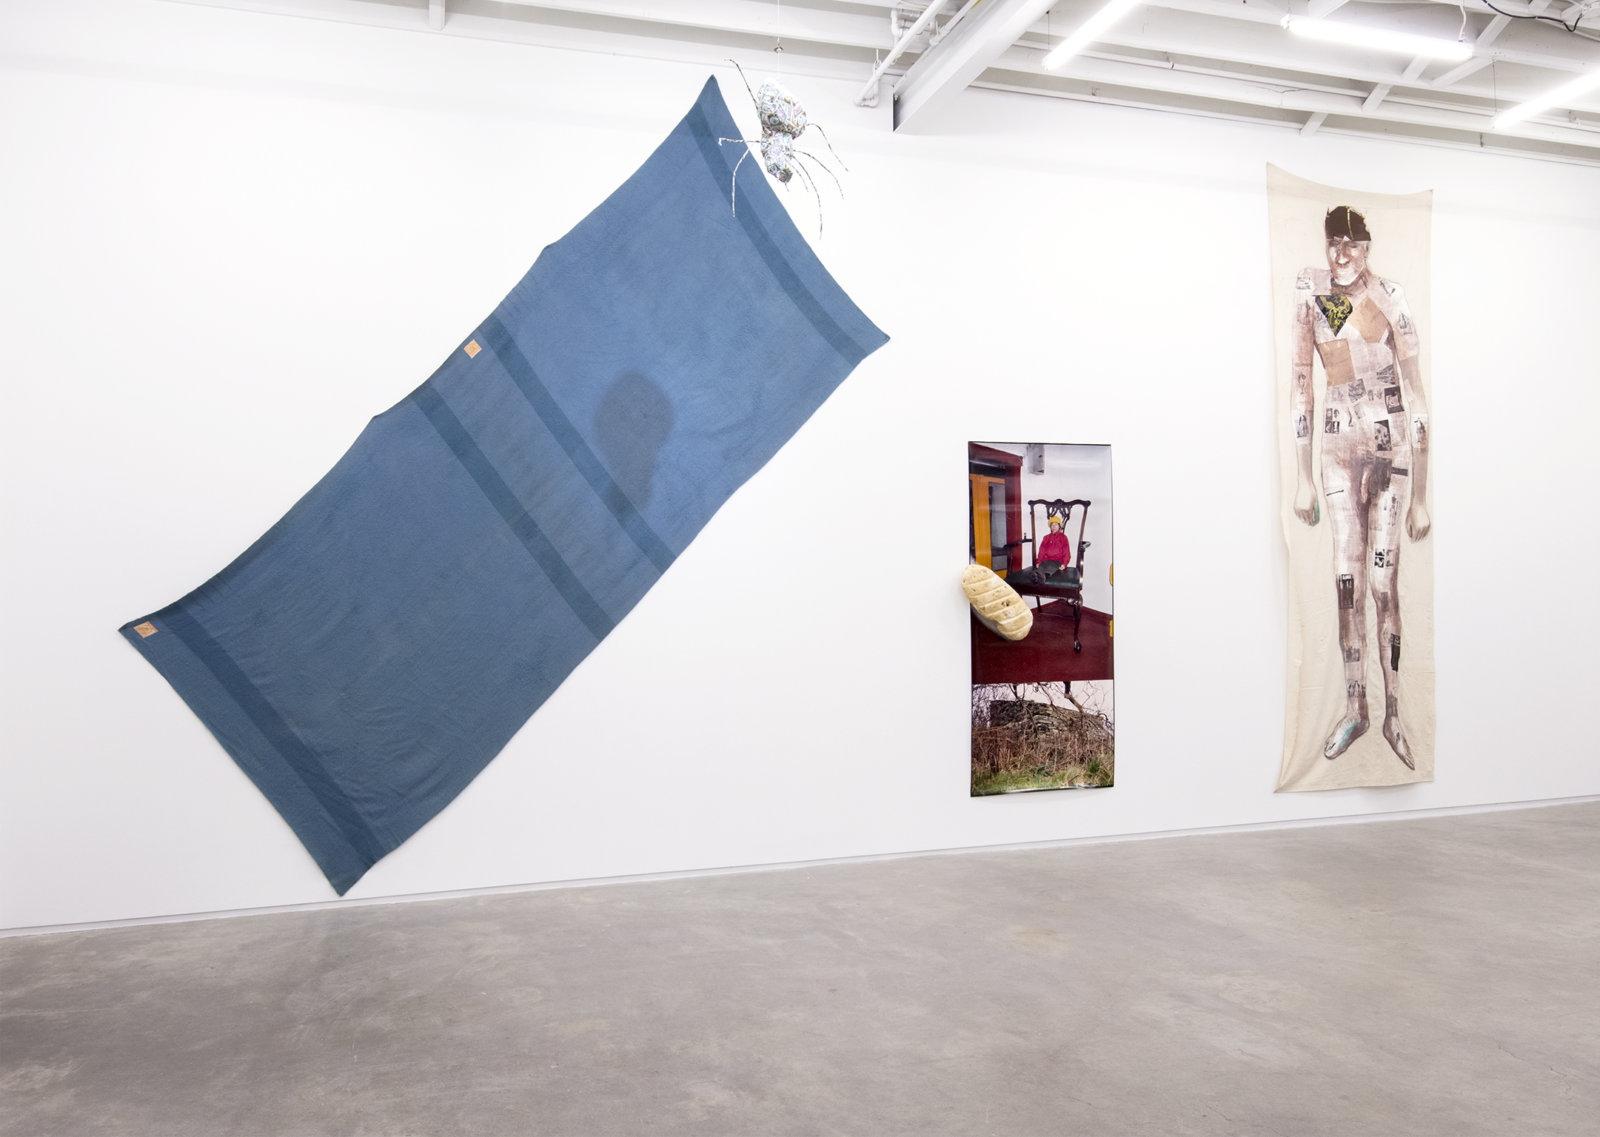 Jerry Pethick, Bigger than a book, Wilder than a Tree, 1994–1997, found book Irish Giant, paint, graphite on linen, styrofoam, cibachrome photograph, wool blanket, spotlight, papier-mâché, metal spider, dimensions variable